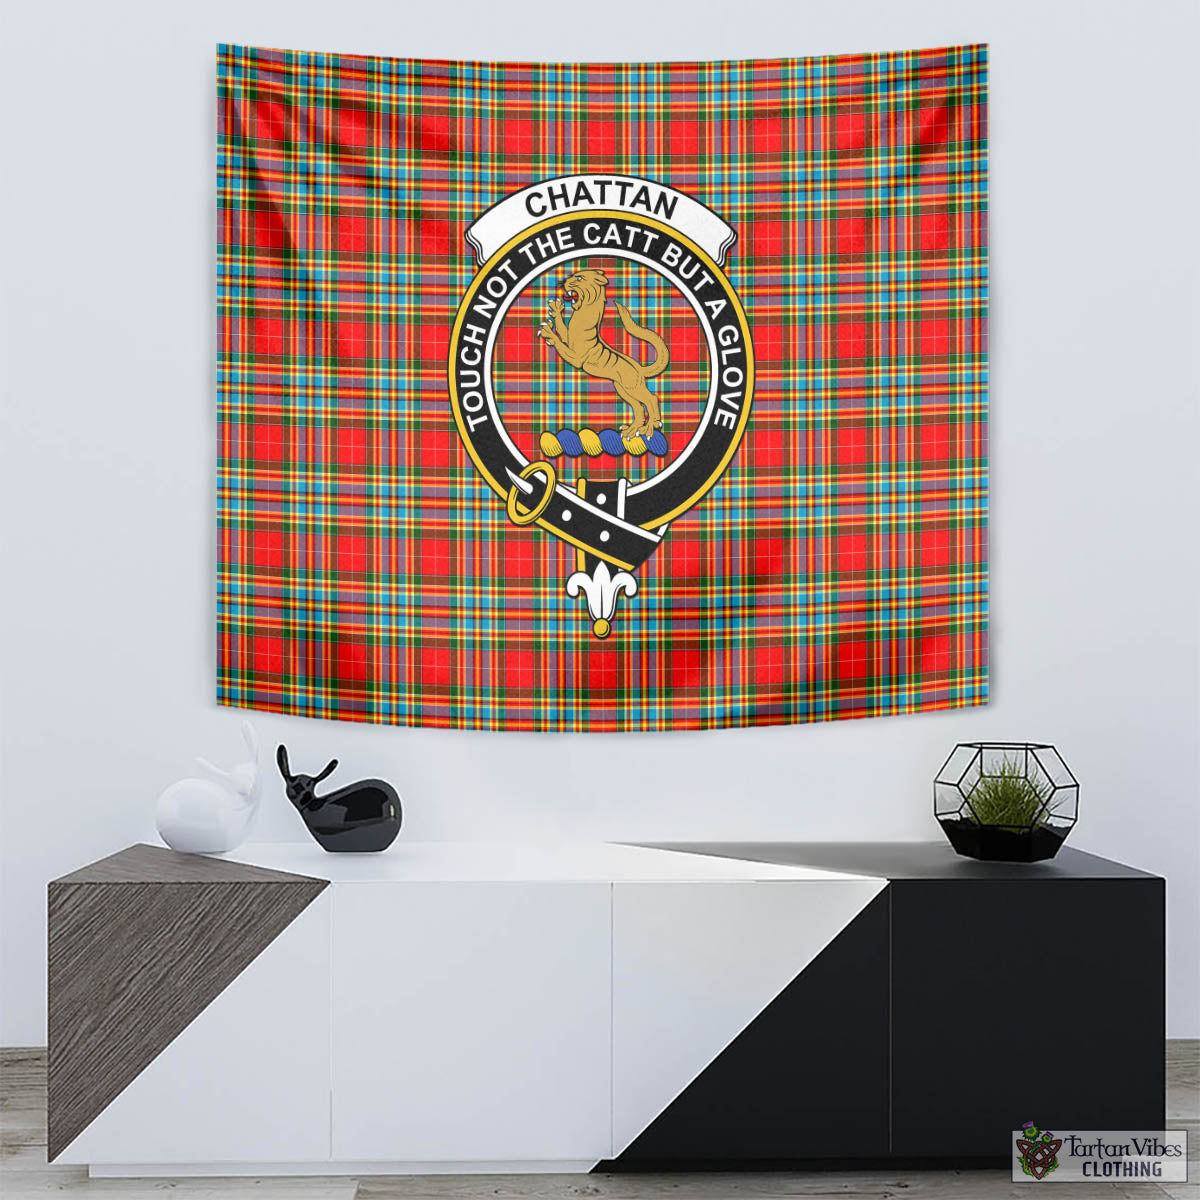 Tartan Vibes Clothing Chattan Tartan Tapestry Wall Hanging and Home Decor for Room with Family Crest